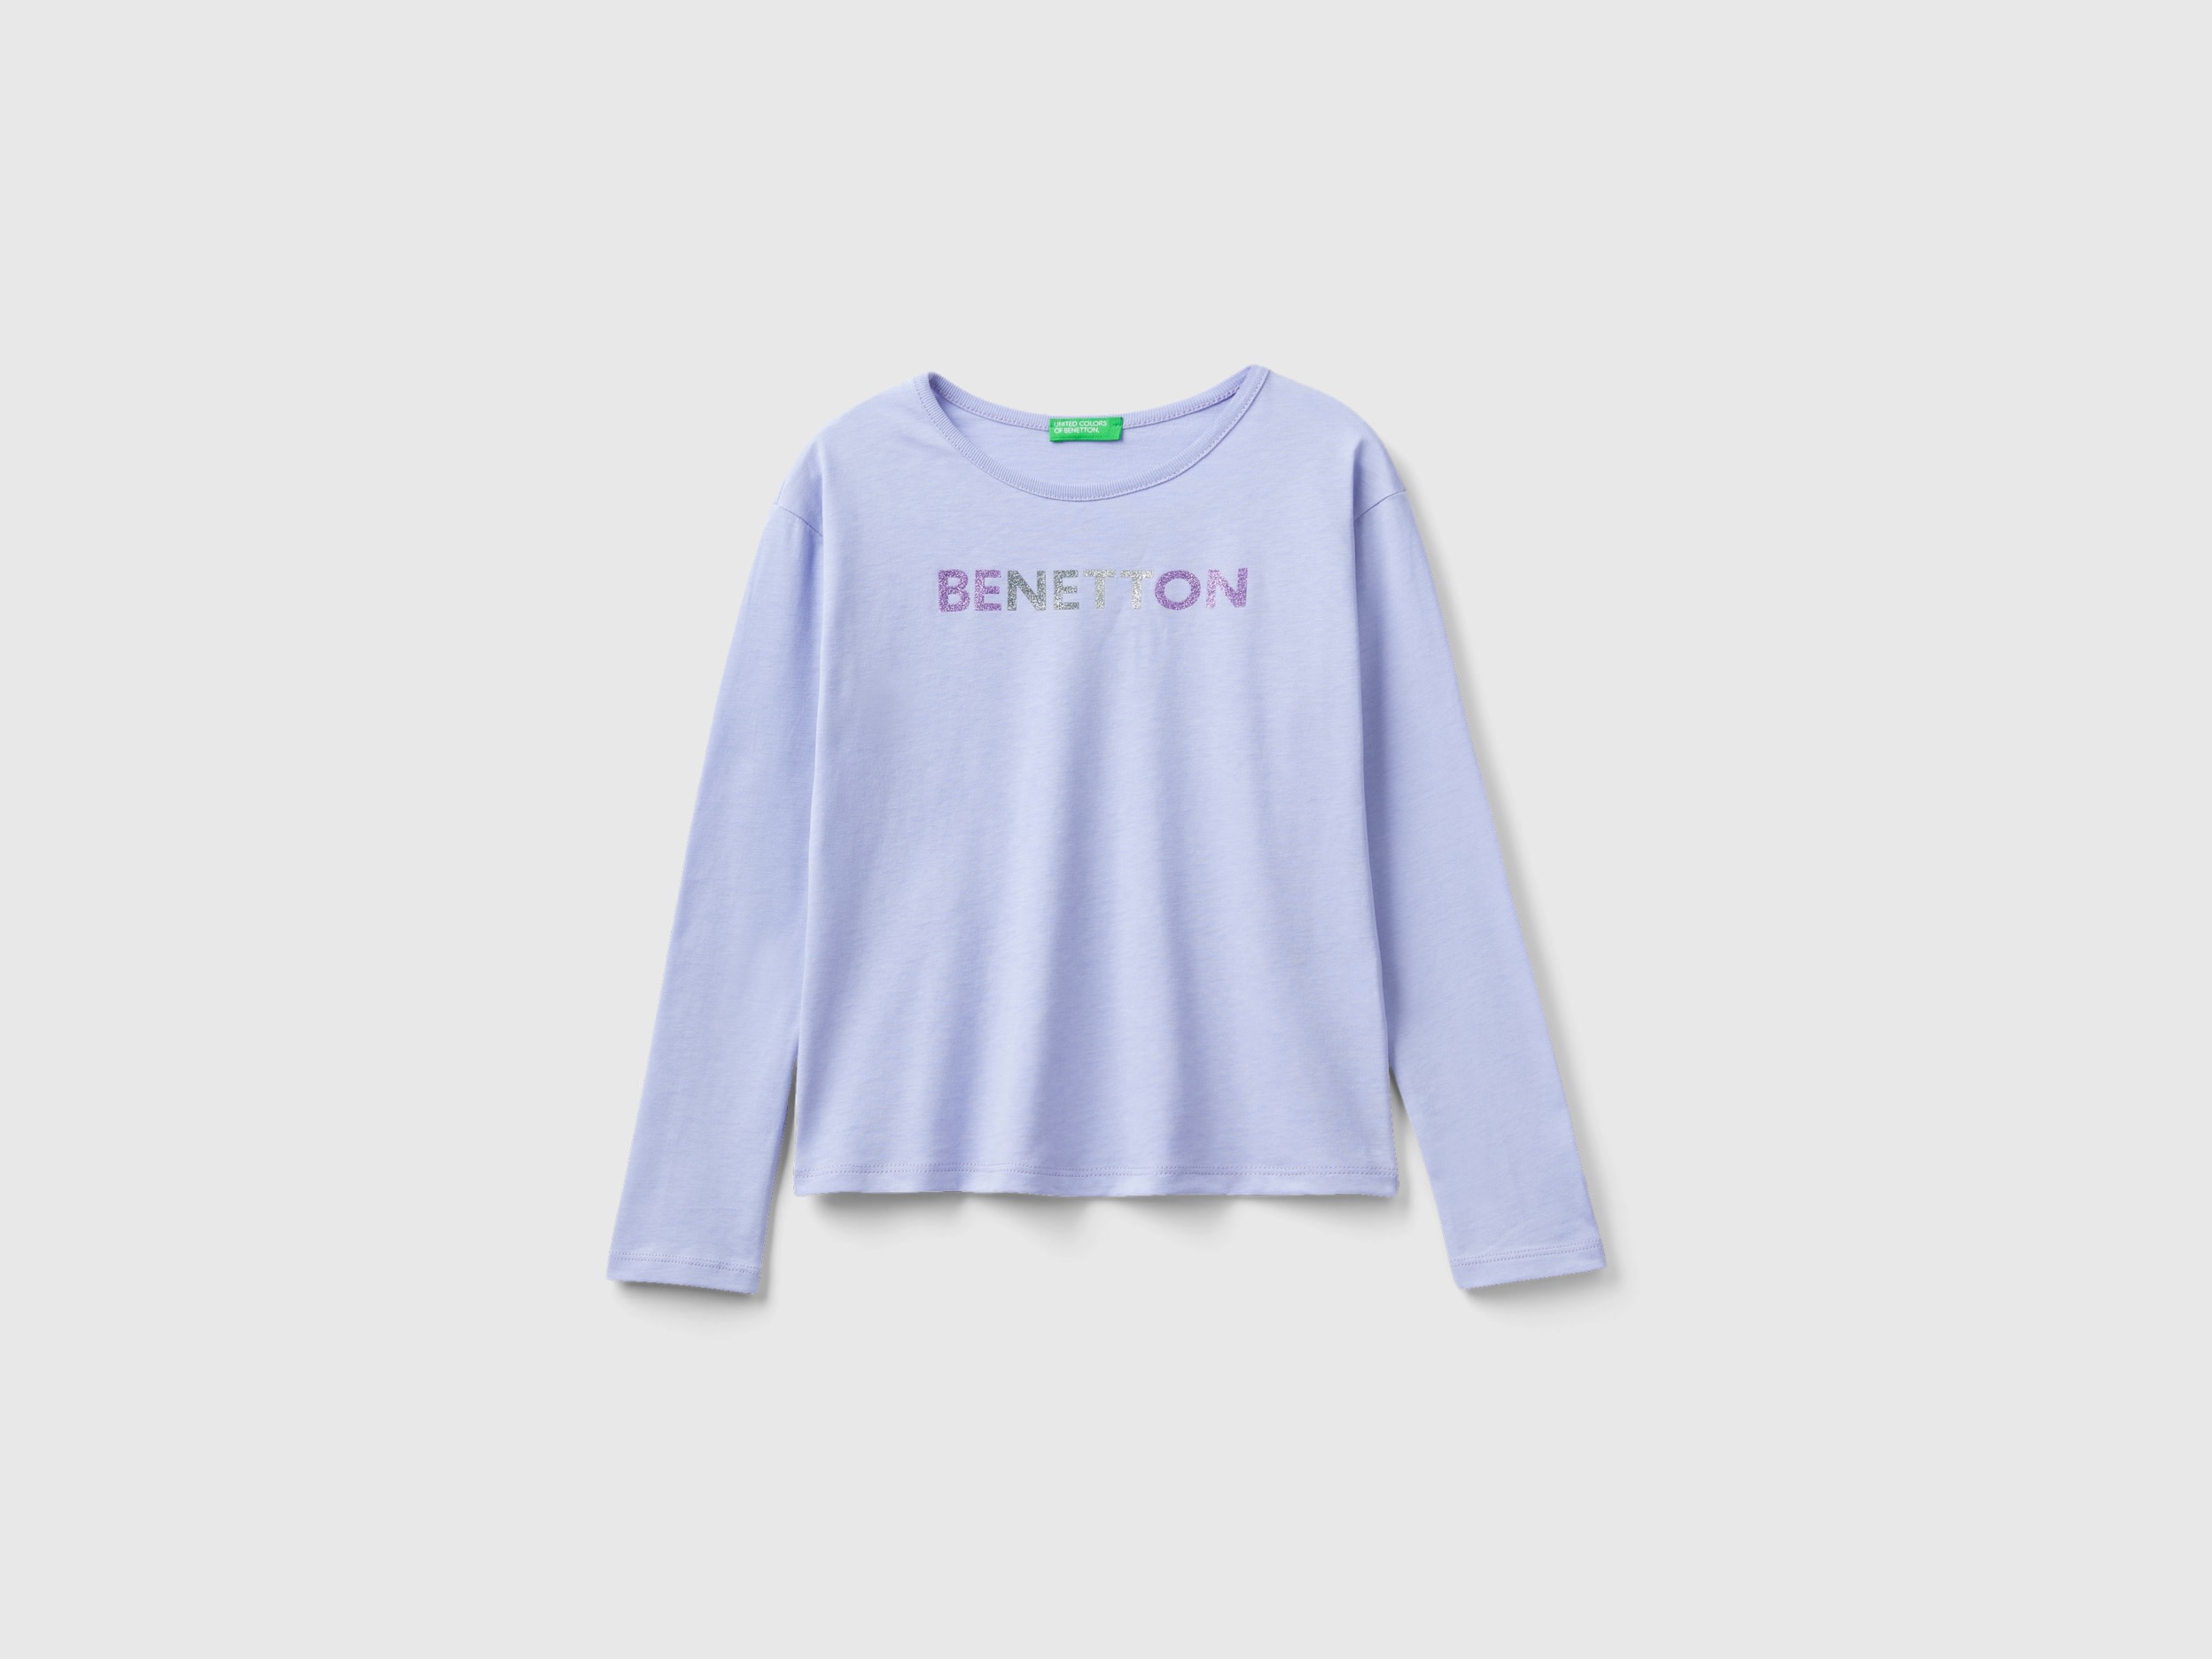 Benetton, T-shirt In Warm Organic Cotton With Glitter, size S, Lilac, Kids